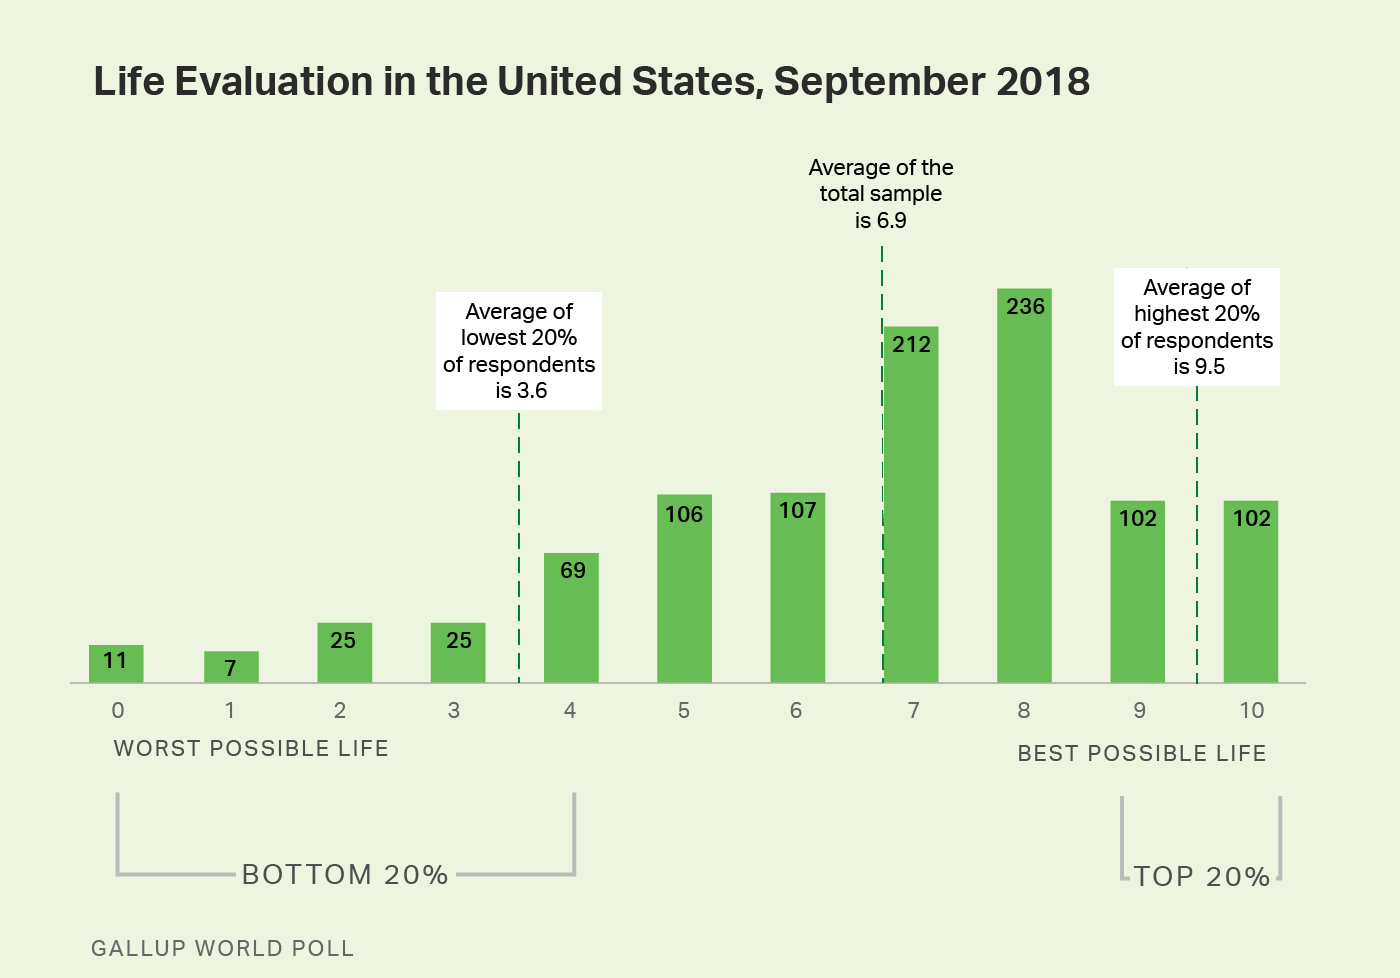 Bar chart. Distribution of life evaluation scores across the United States in 2018.